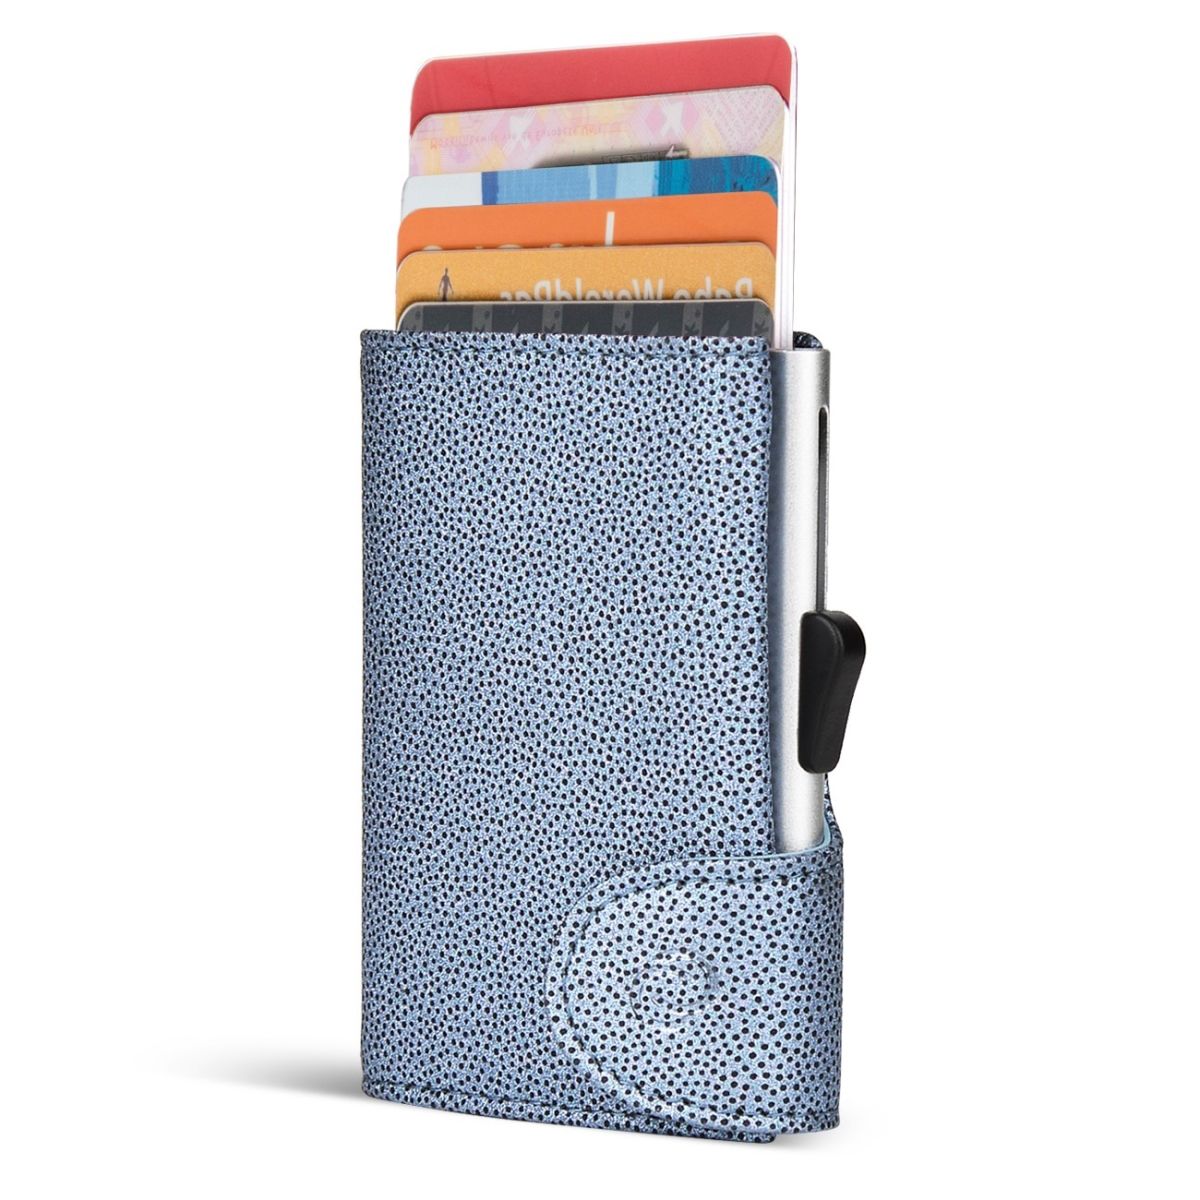 C-Secure Aluminum Card Holder with Genuine Leather - Fashion Blue